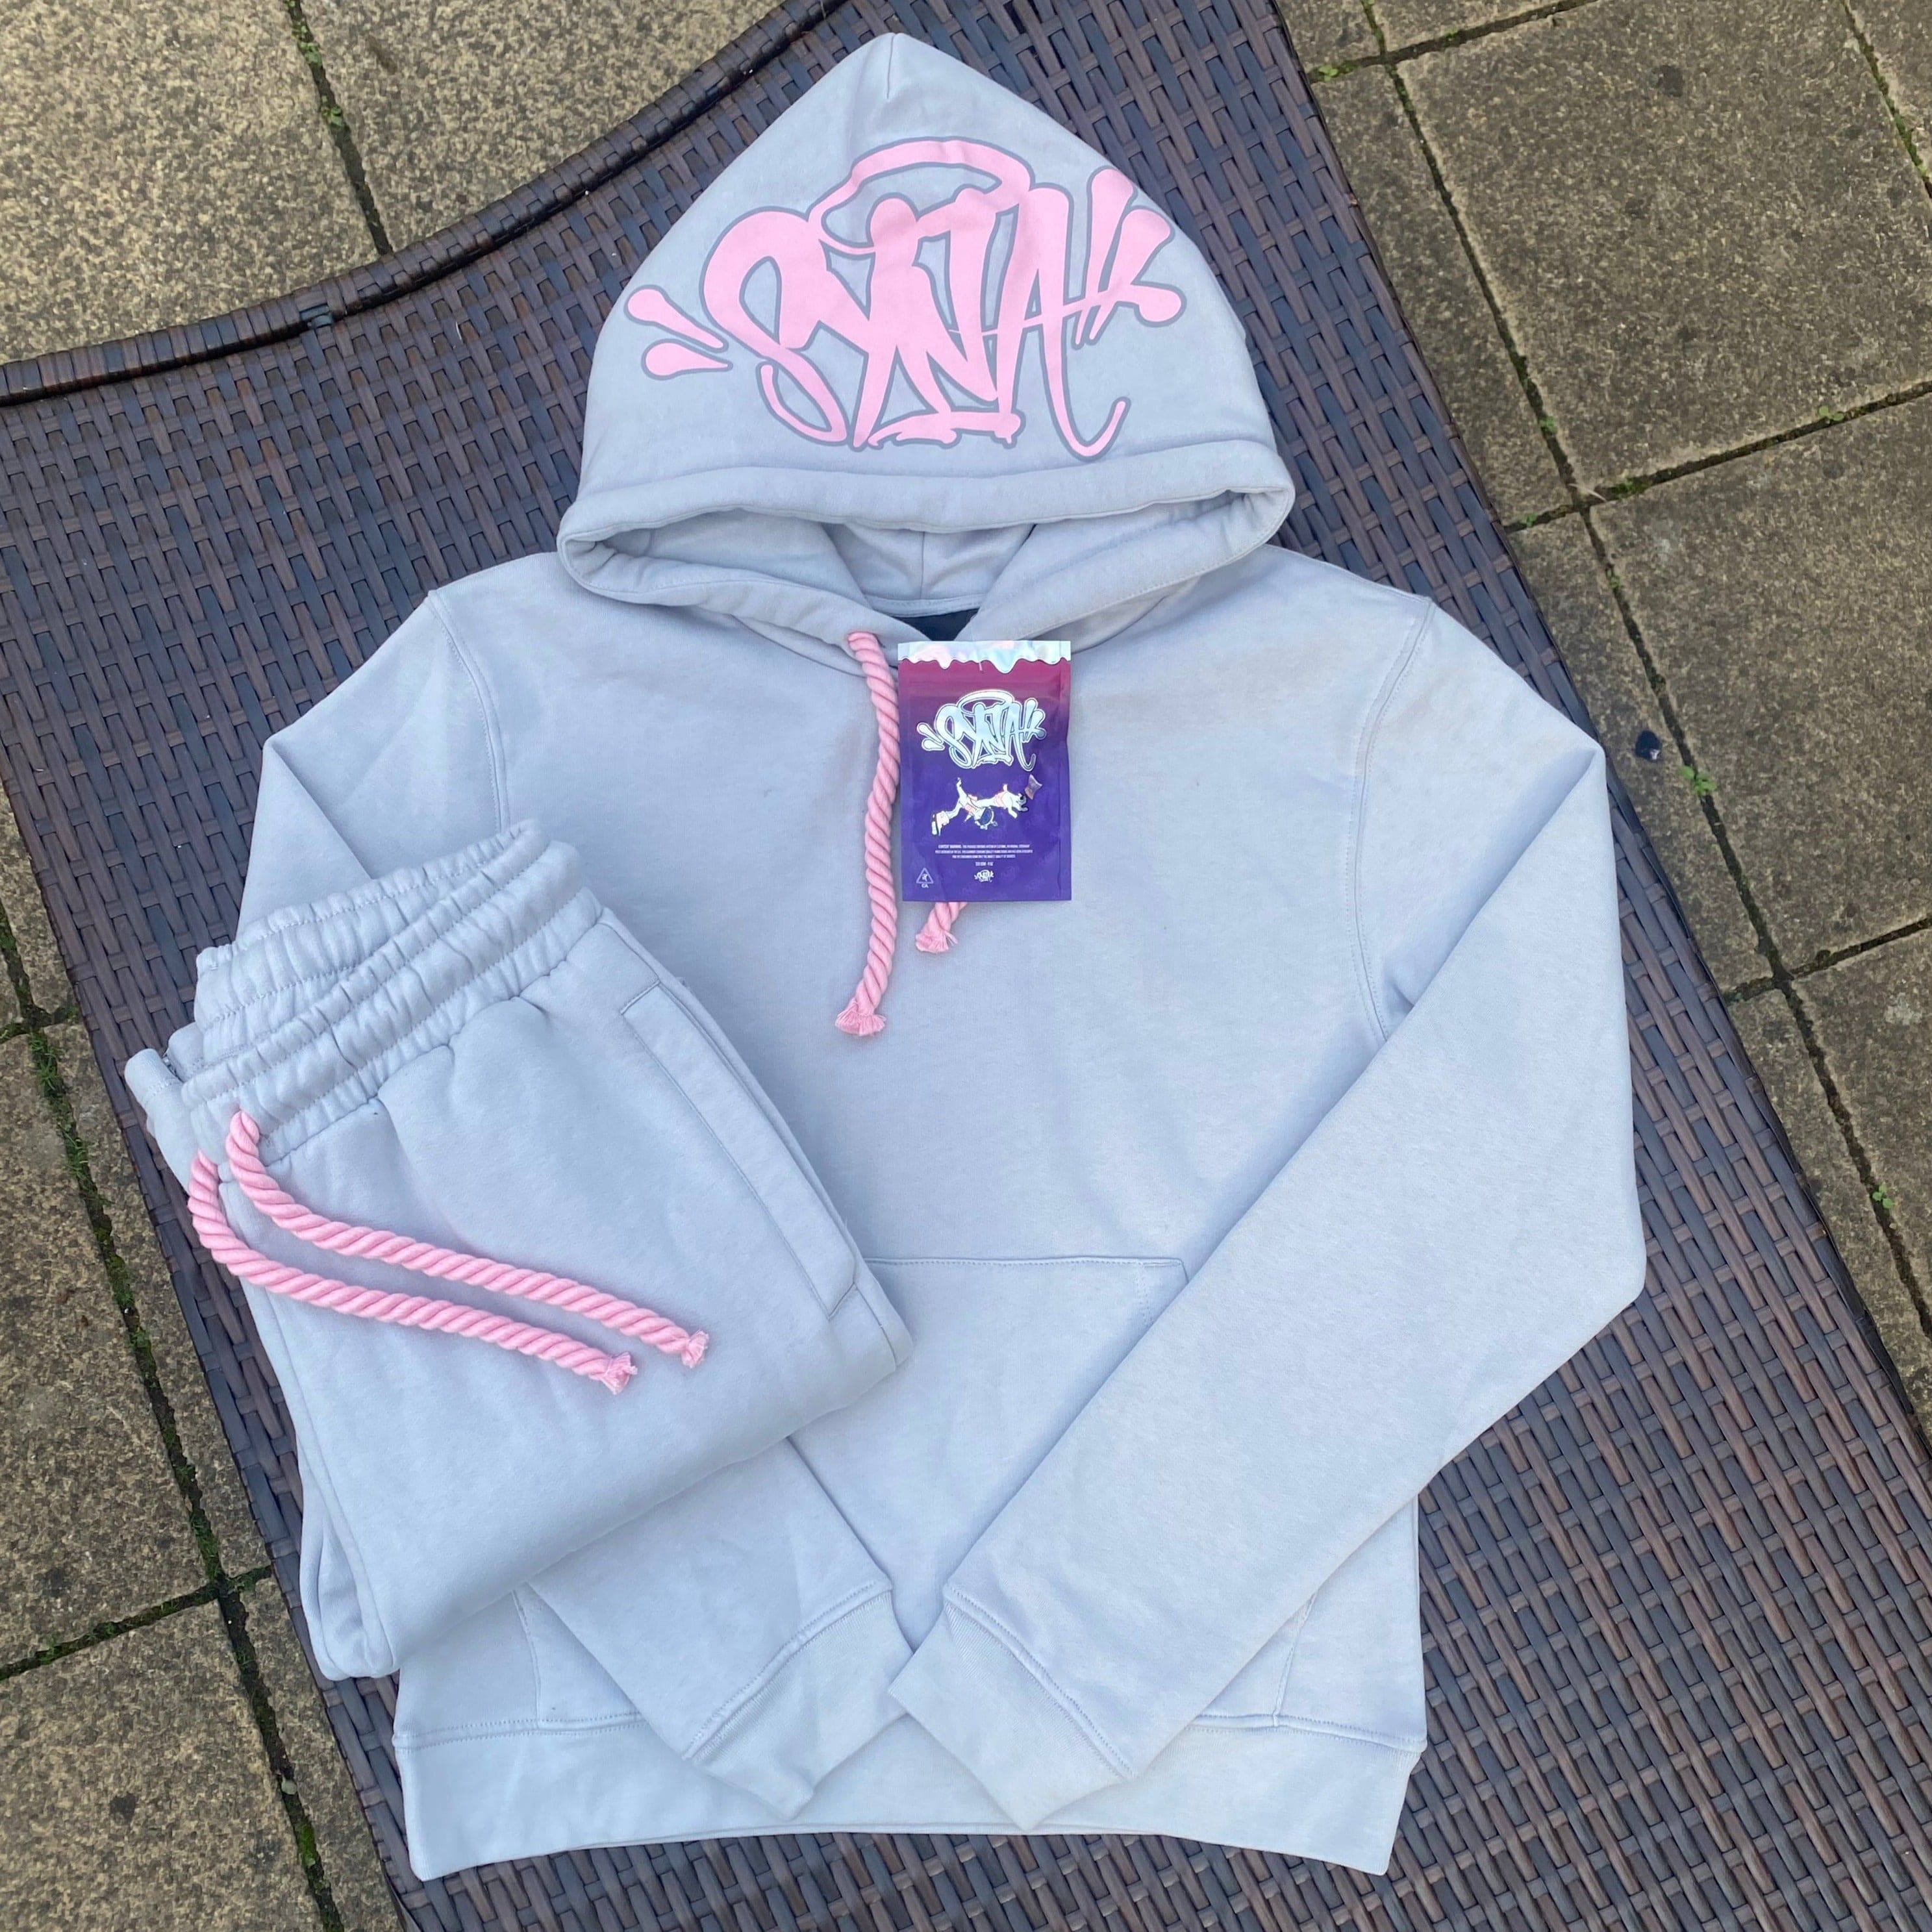 Syna World Grey/Pink Tracksuit